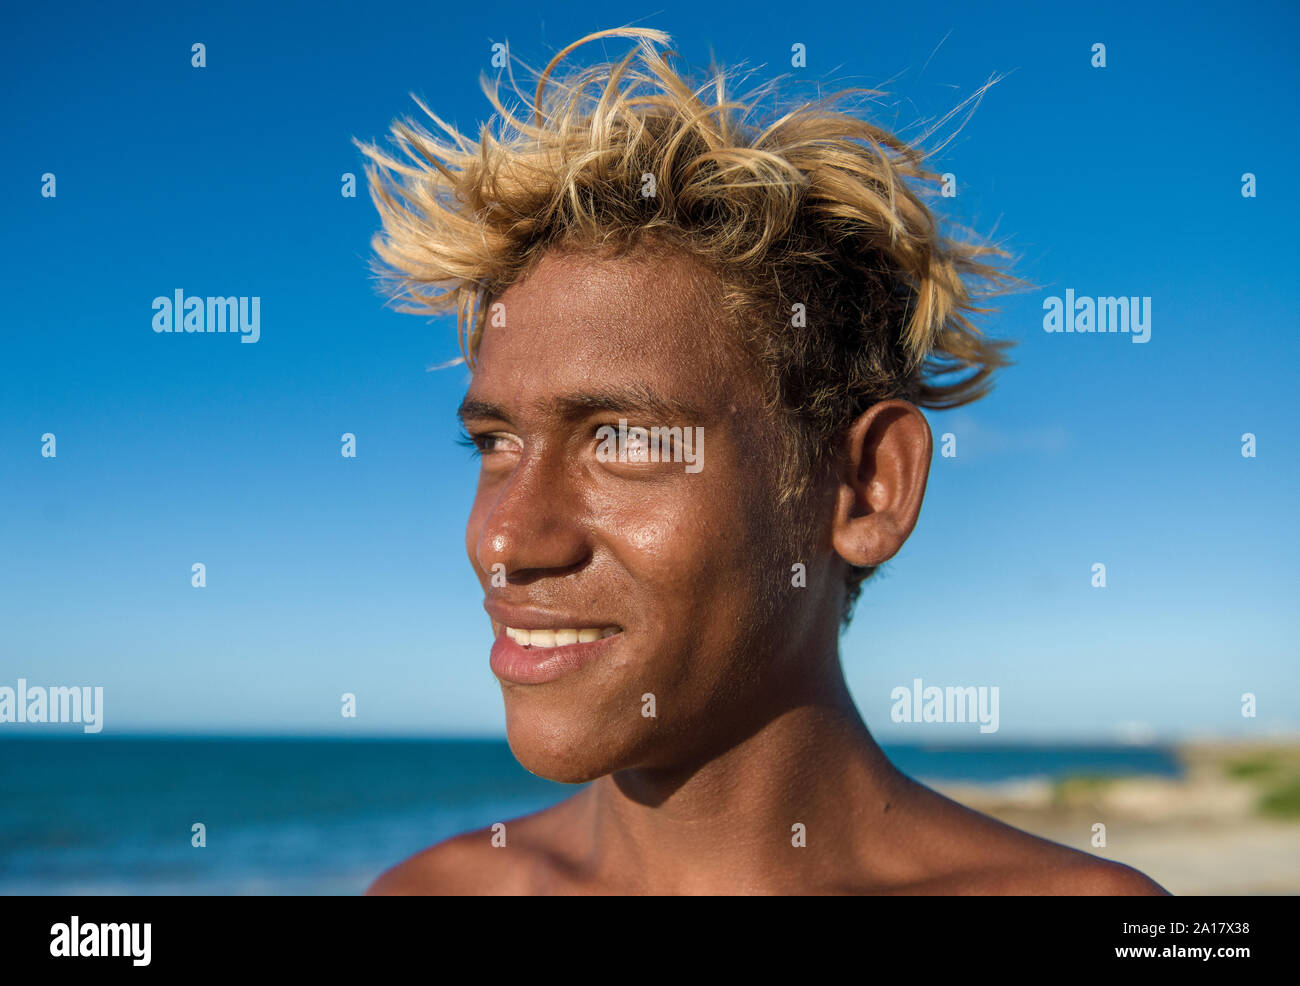 Brazilian guy on seashore with dyed hair and tan skin Stock Photo